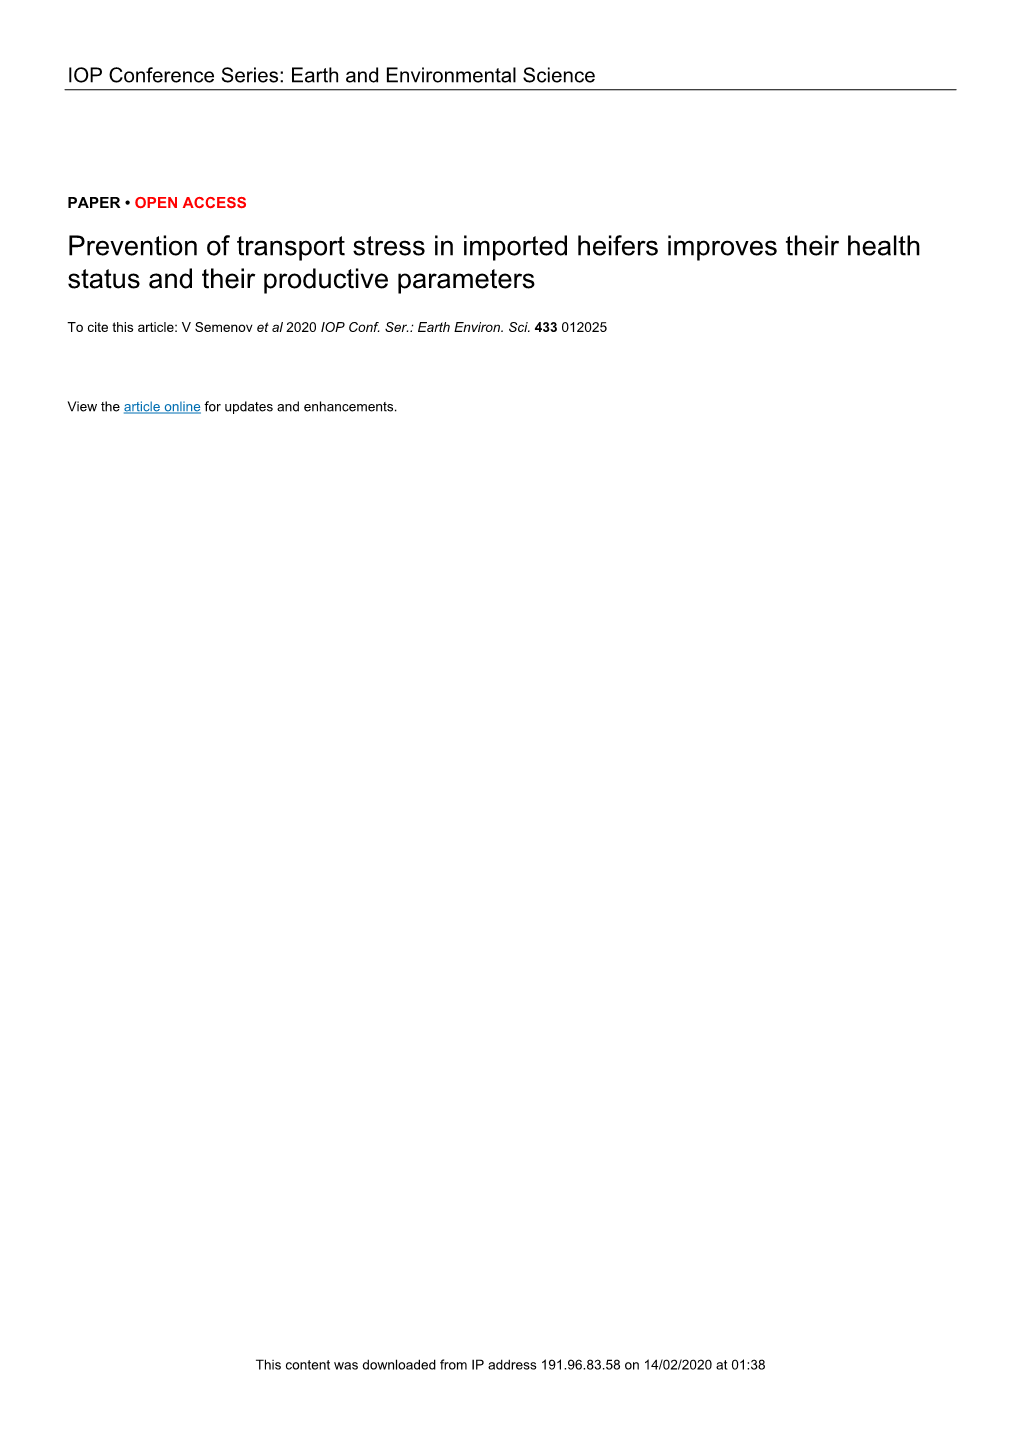 Prevention of Transport Stress in Imported Heifers Improves Their Health Status and Their Productive Parameters